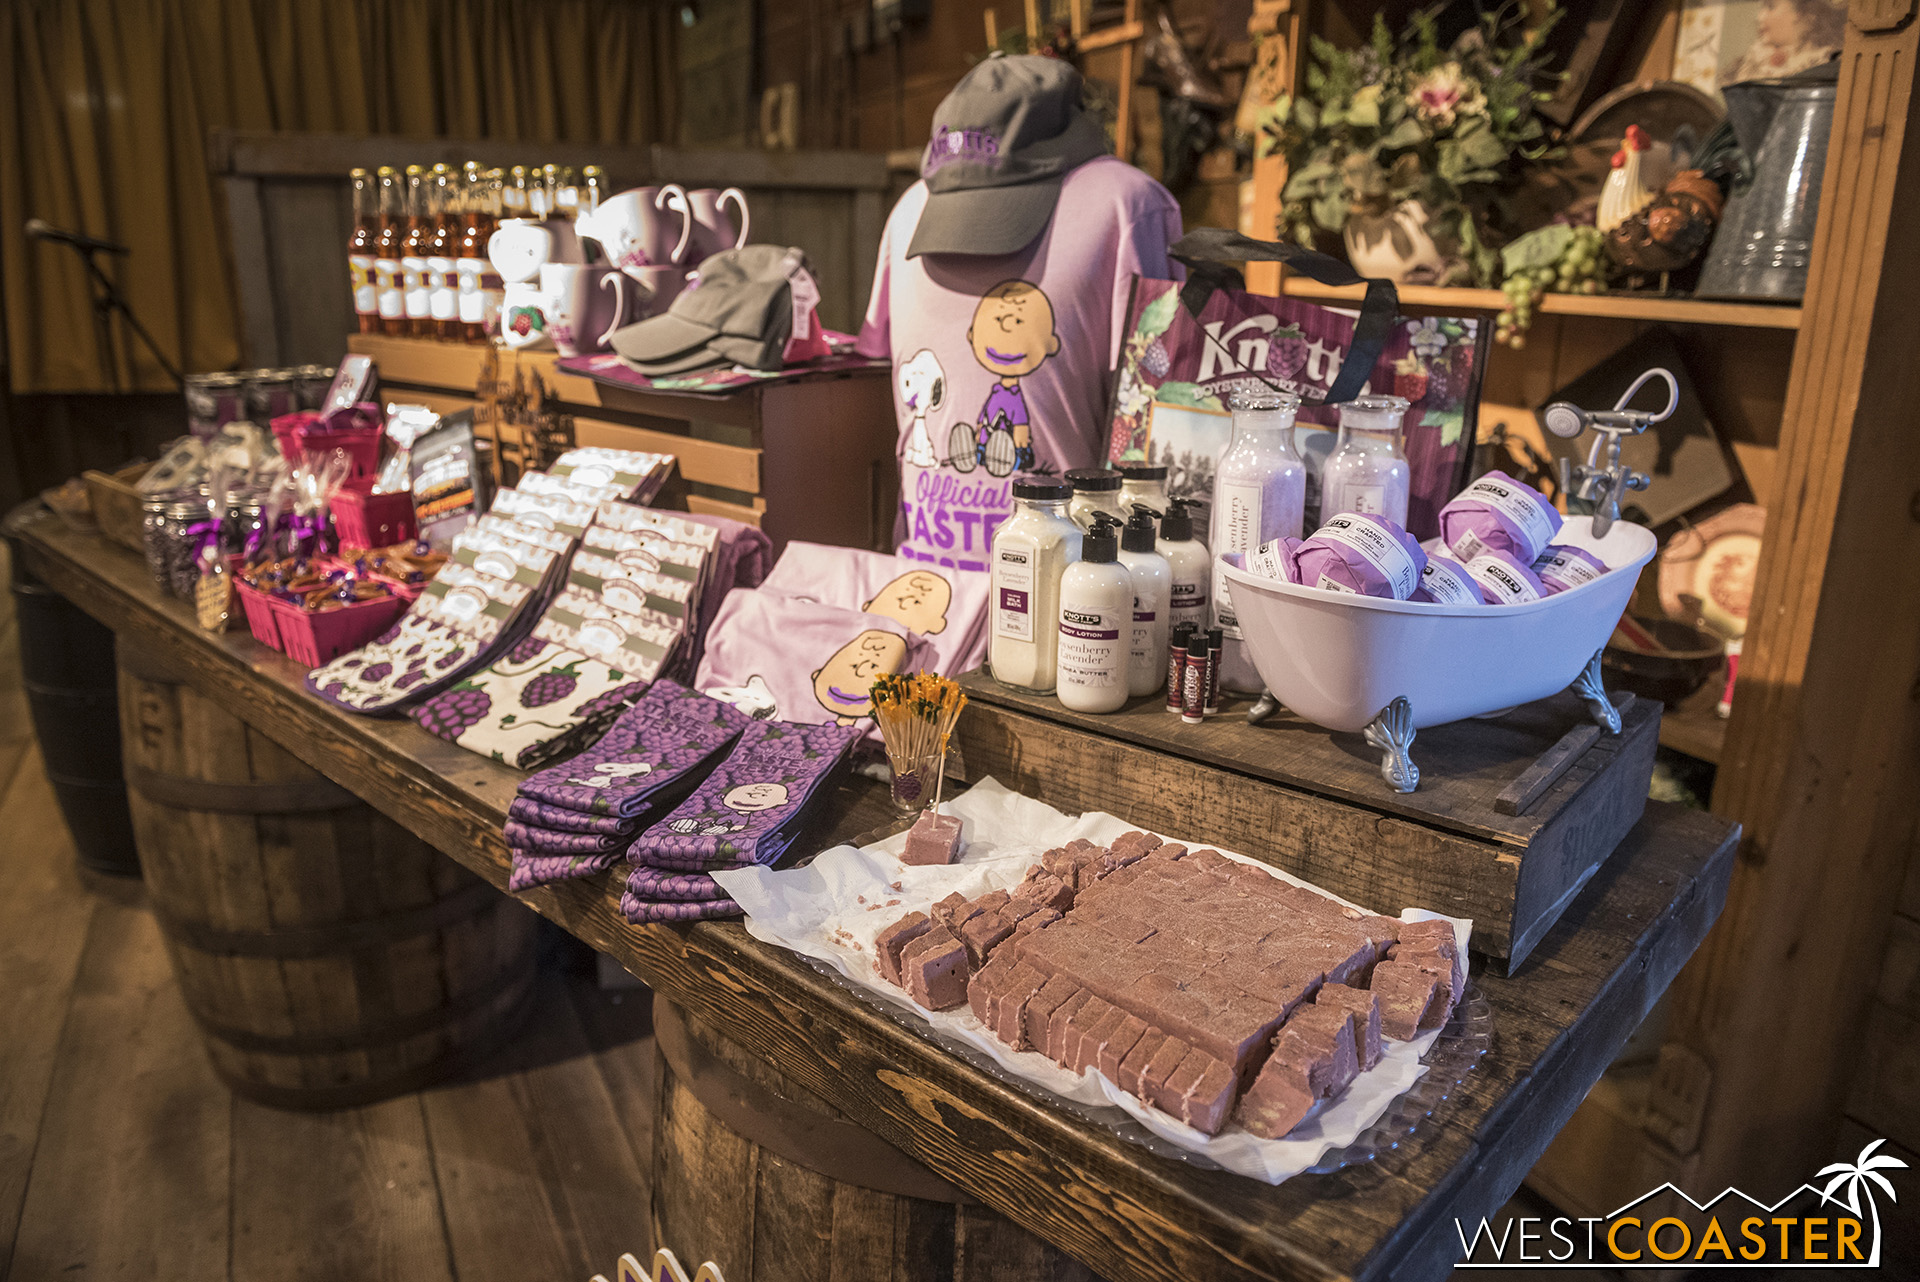  Yes, that’s boysenberry fudge in front.  There are also boysenberry soaps and lotions too, for all the boysenberry fanatics out there! 